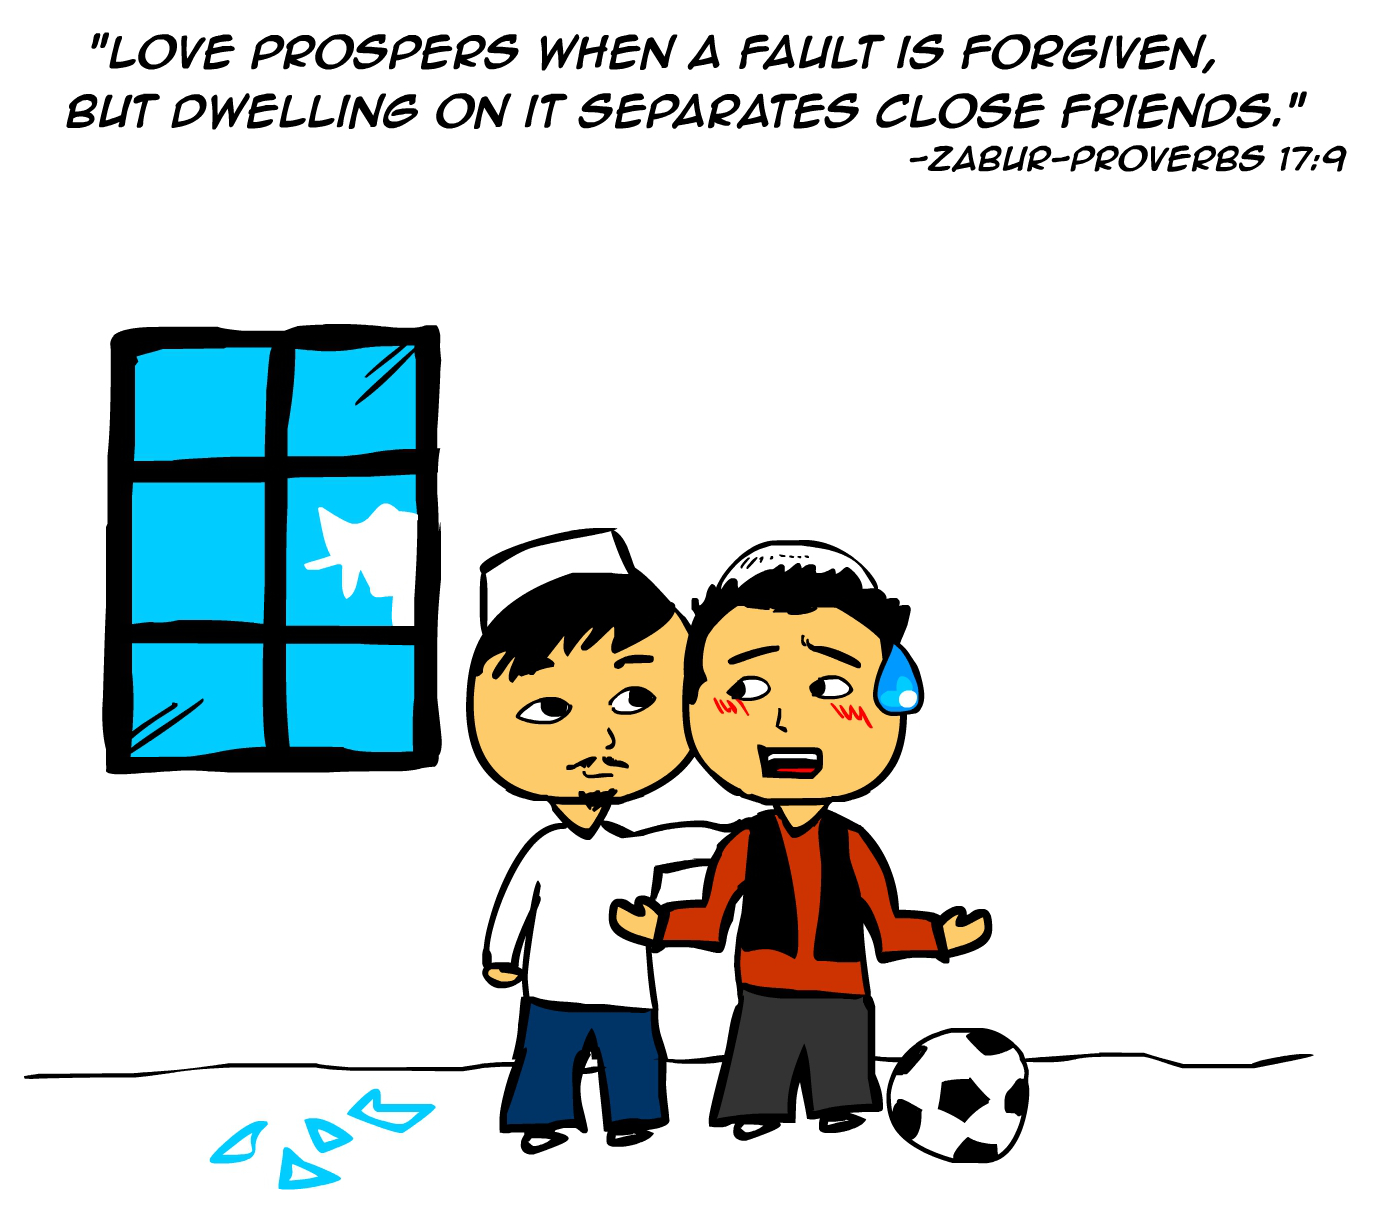 "Love prospers when a fault is forgiven, but dwelling on it separates close friends." -Zabur Proverbs 17:9